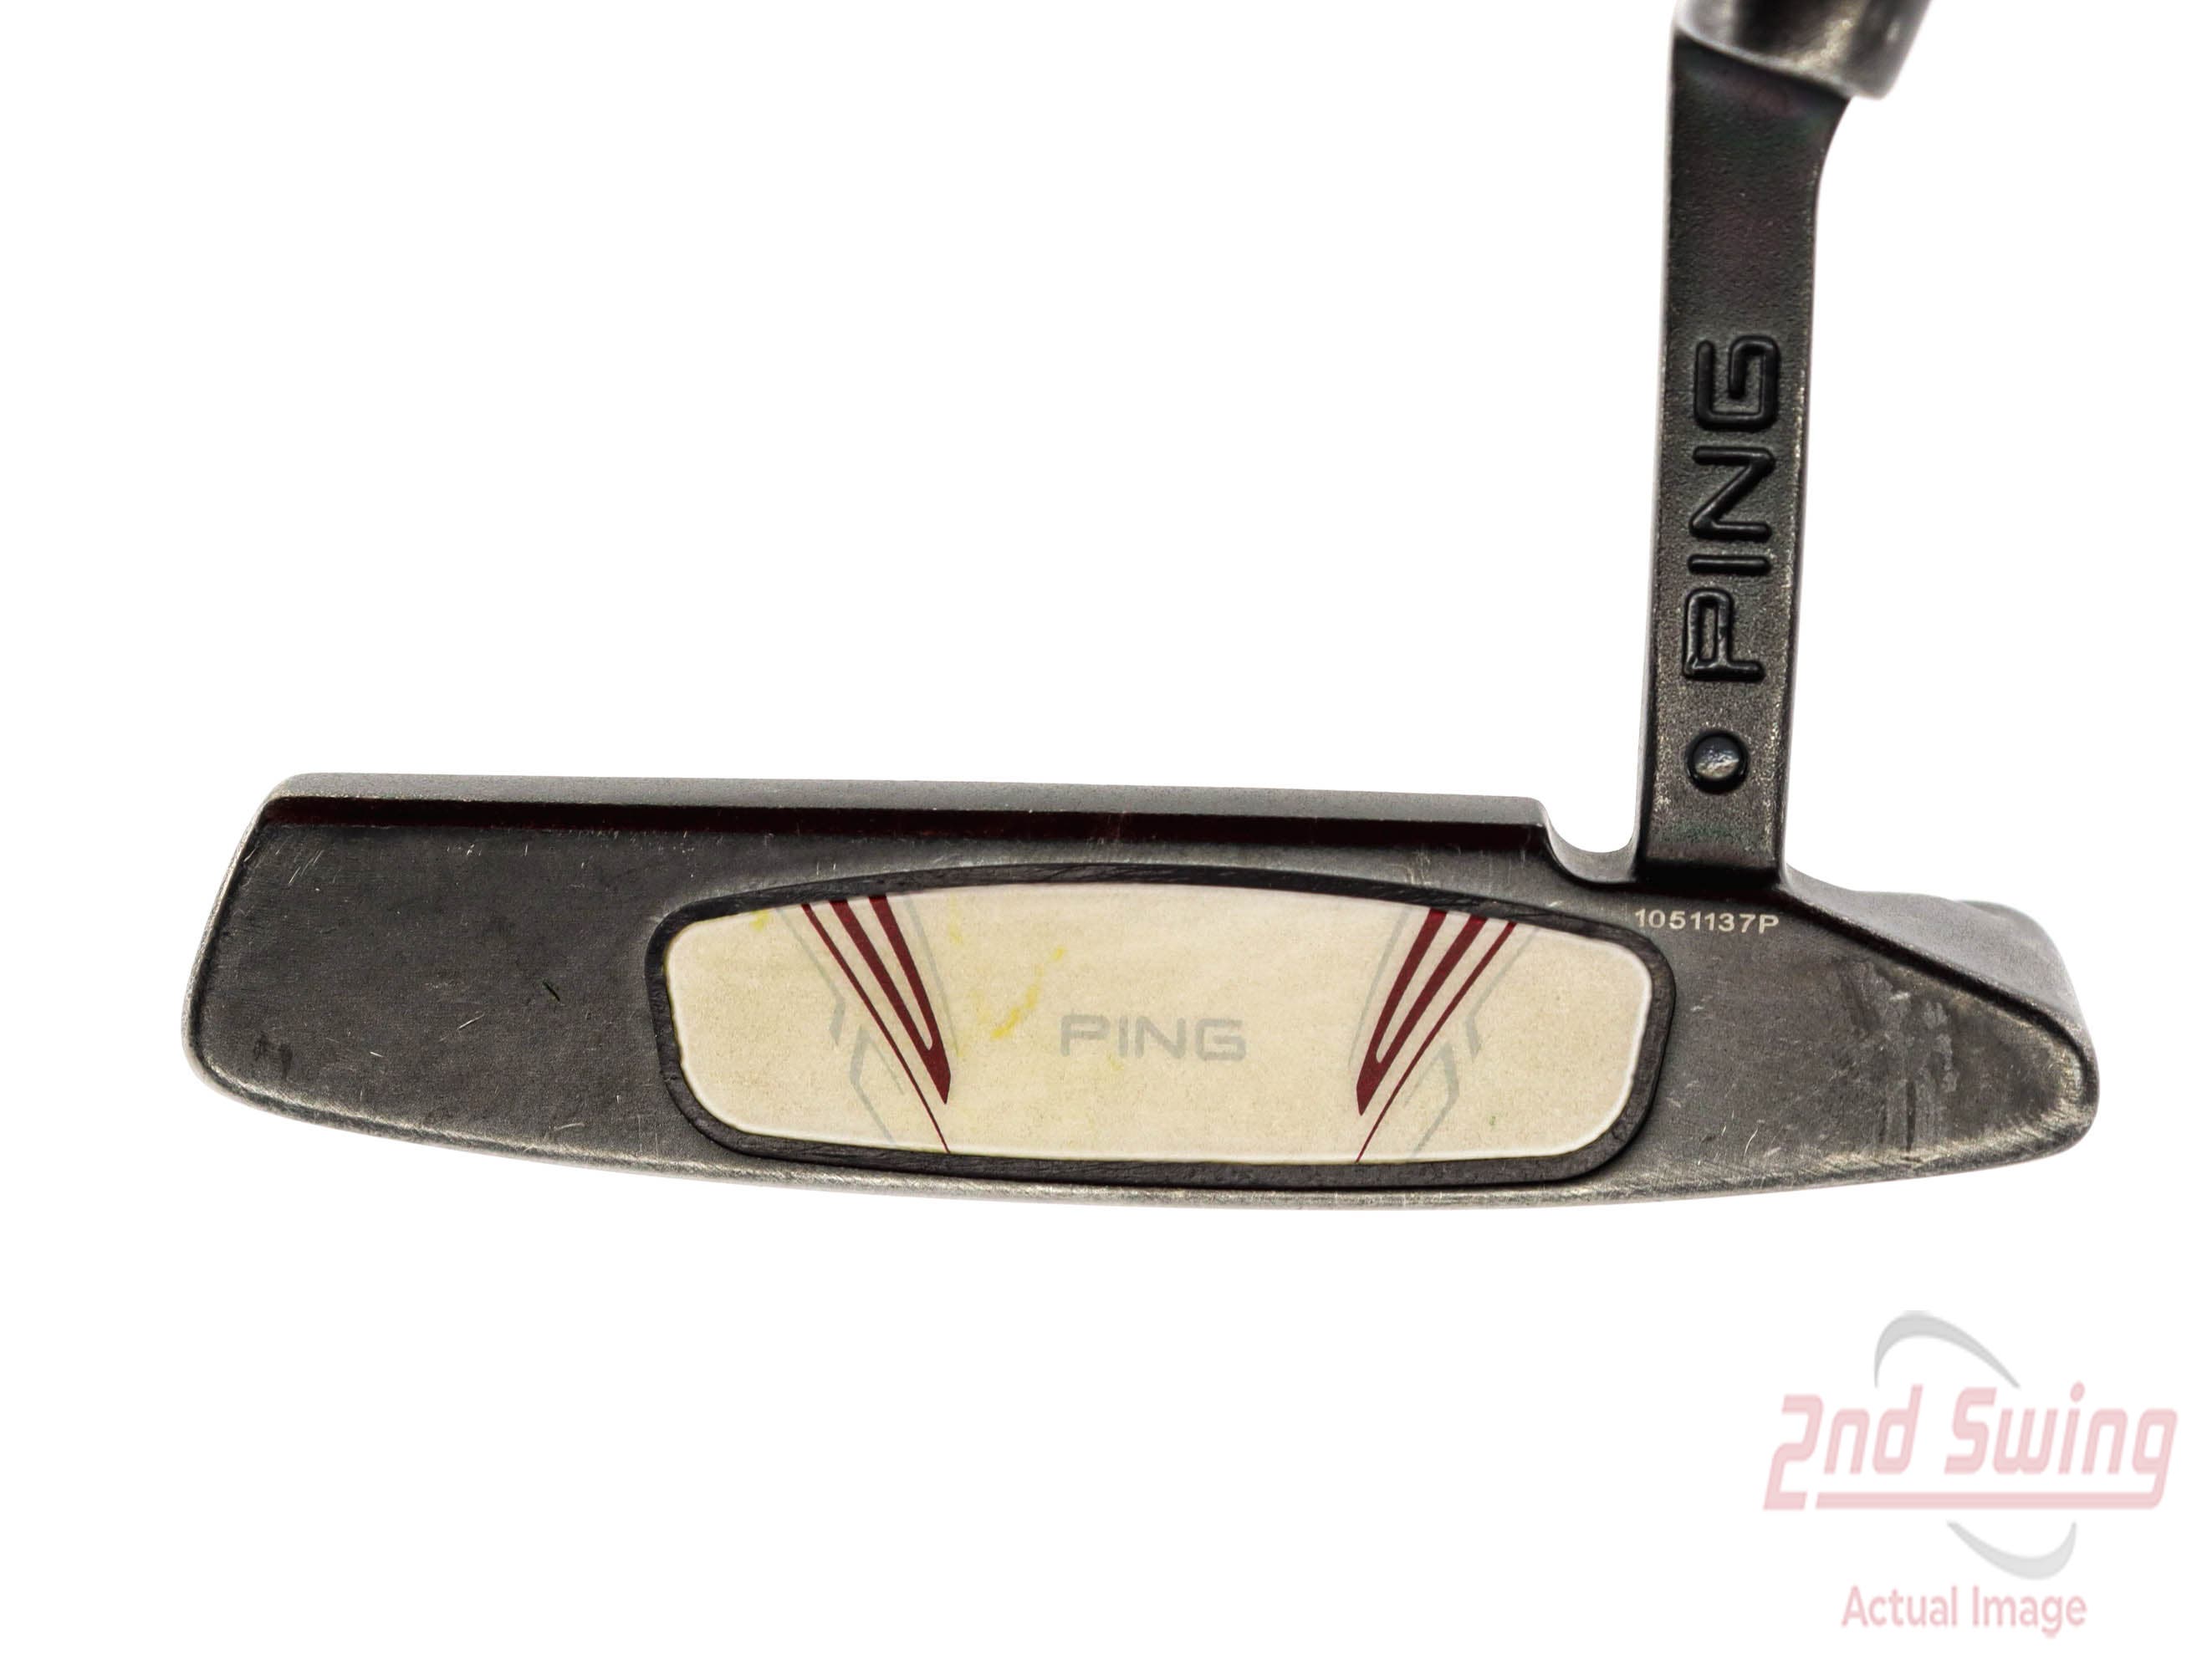 Ping Scottsdale Anser 2 Putter (A-32437256446)